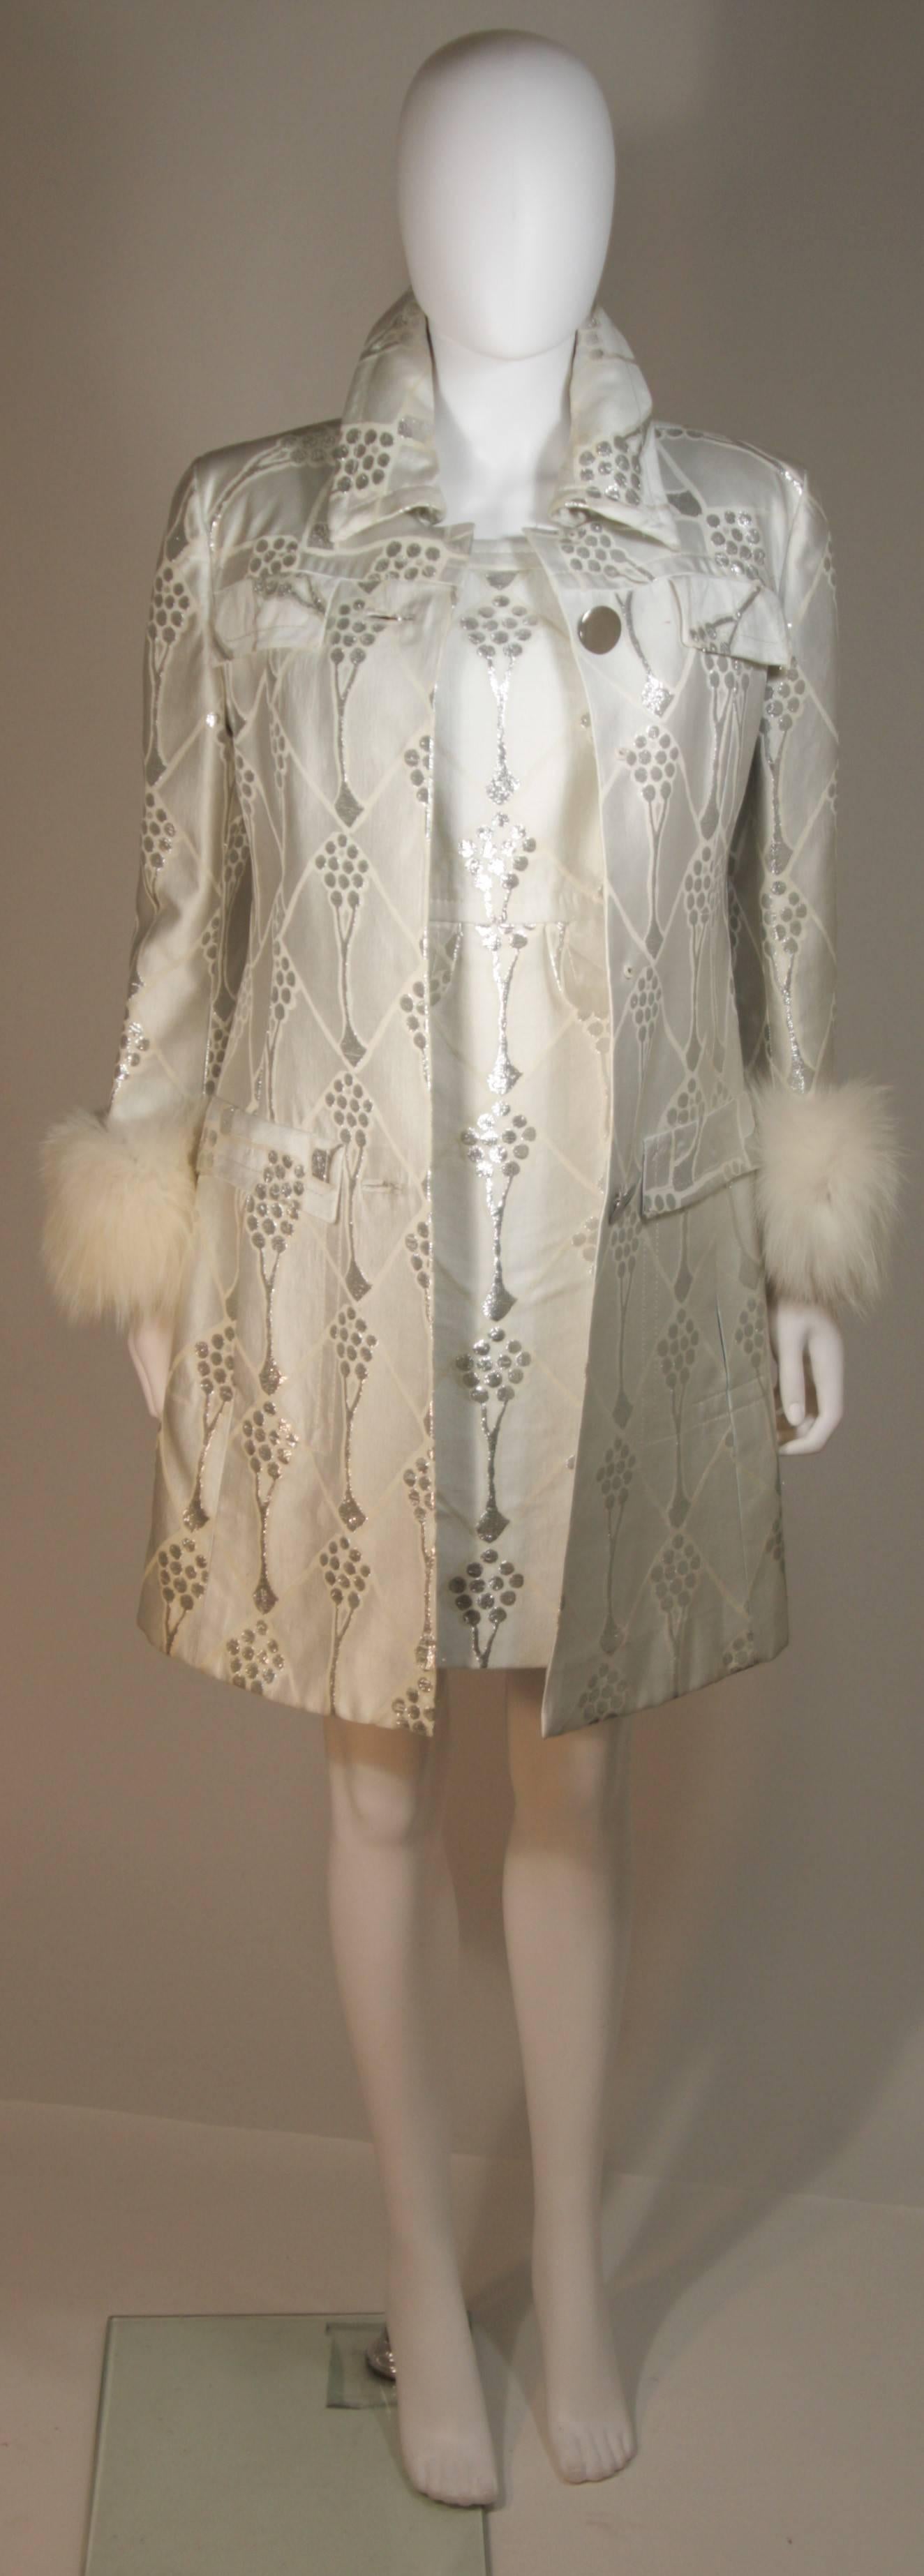 This Sorelle Fontana coat and dress set is composed of a white and silver metallic twill. The coat features a fox fur trim and center front button closures. The collar has a pliable metal detail so it may sit up right. The dress is a classic